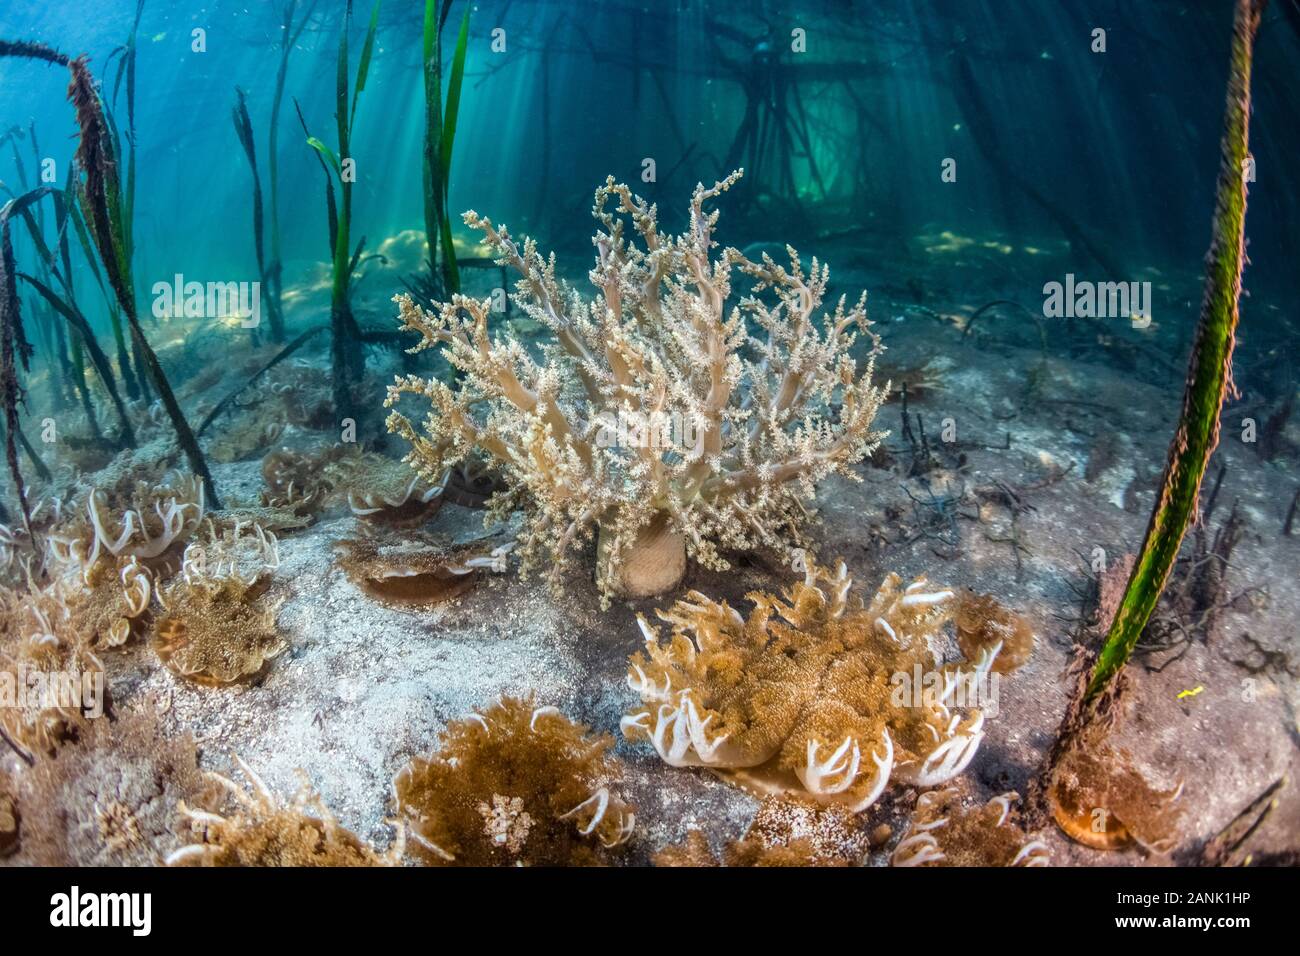 upside down jellyfish and tree anemone, or hell's fire anemone, Actinodendron arboreum, grow at the edge of a mangrove forest in Komodo National Park, Stock Photo